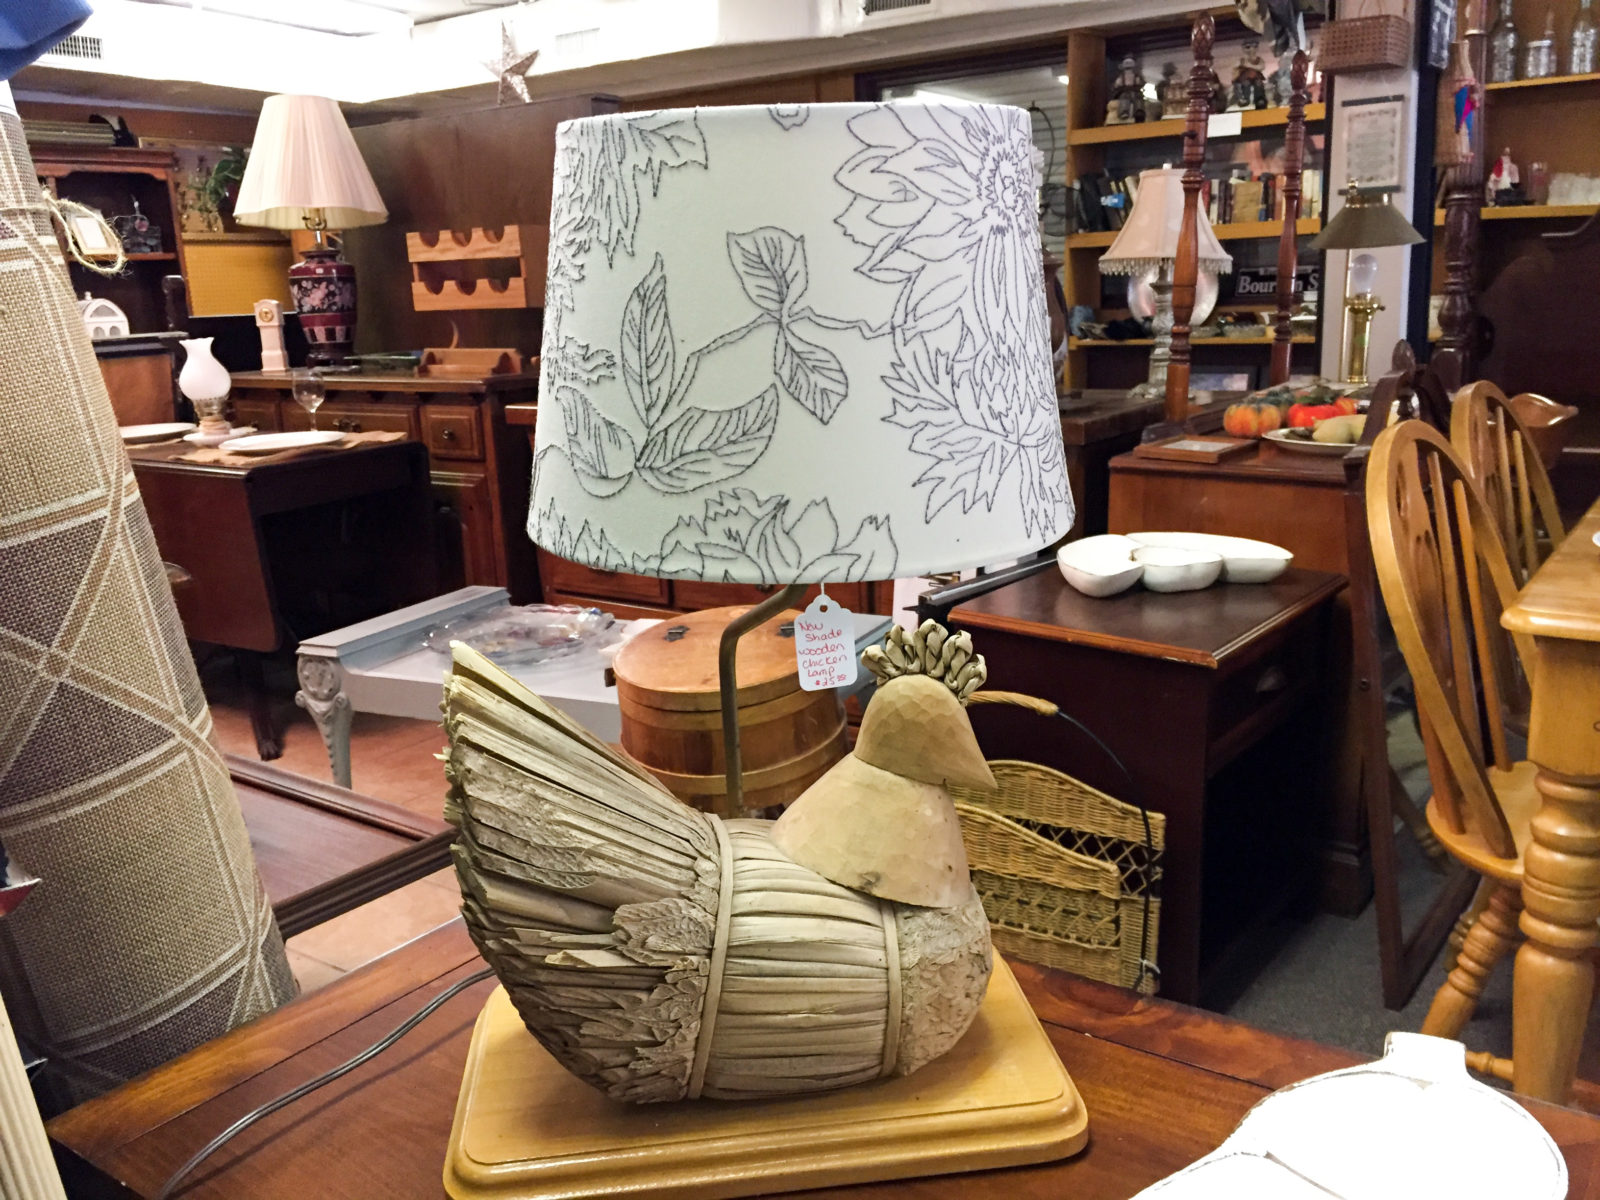 Chicken Lamp • This cute wooden chicken lamp would look adorable on any side table. Great fit In a country room setting or any primitive room.